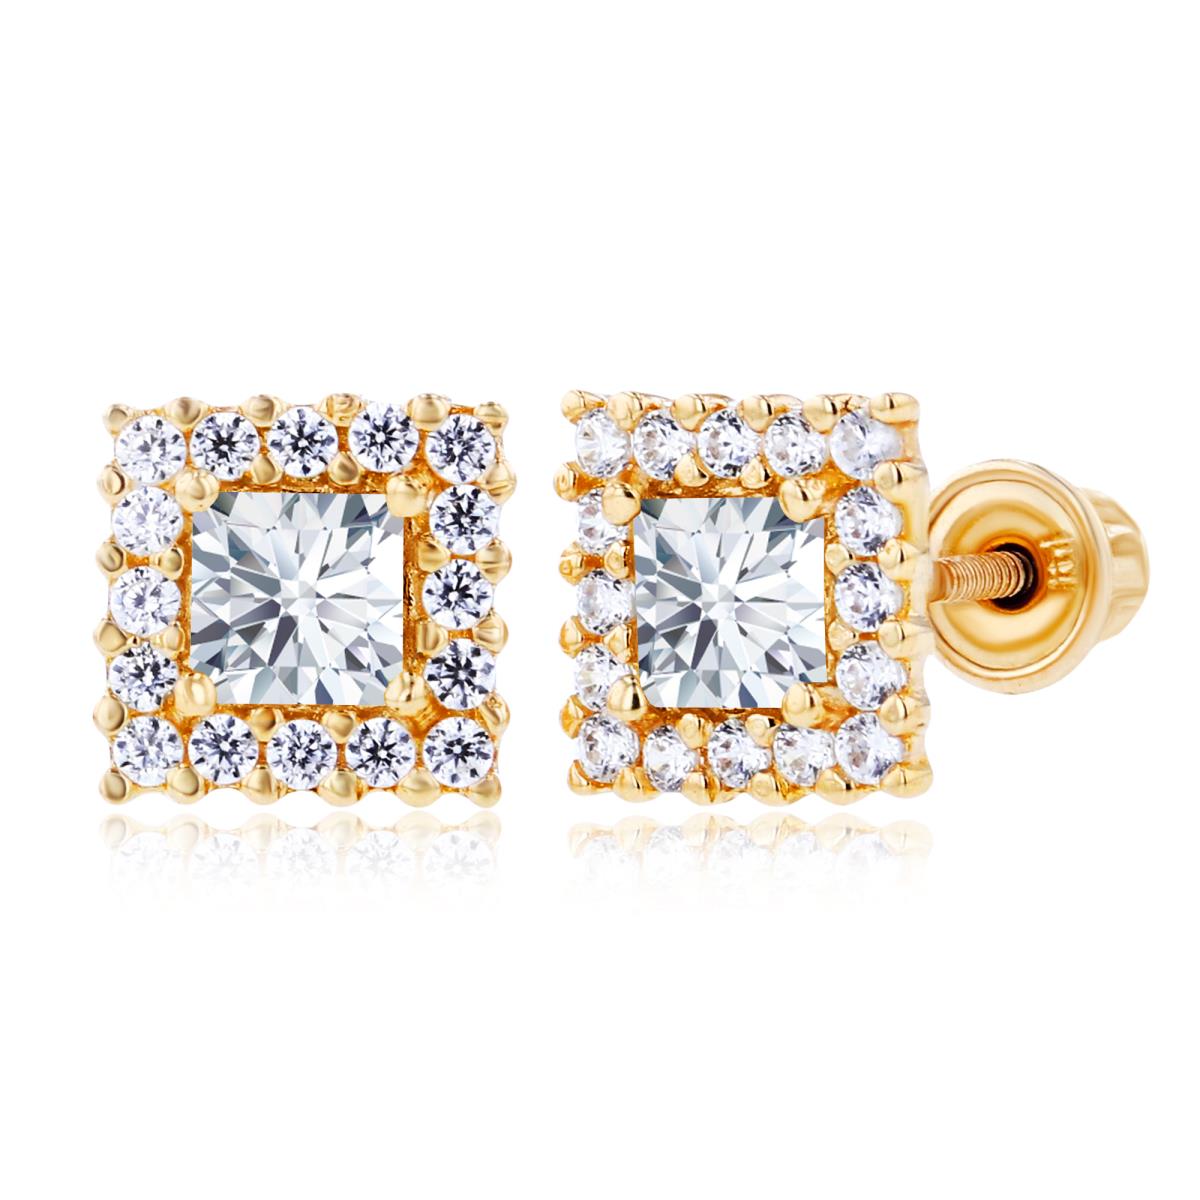 Sterling Silver Yellow 3mm Square & 1mm Round Created White Sapphire Square Screwback Earrings